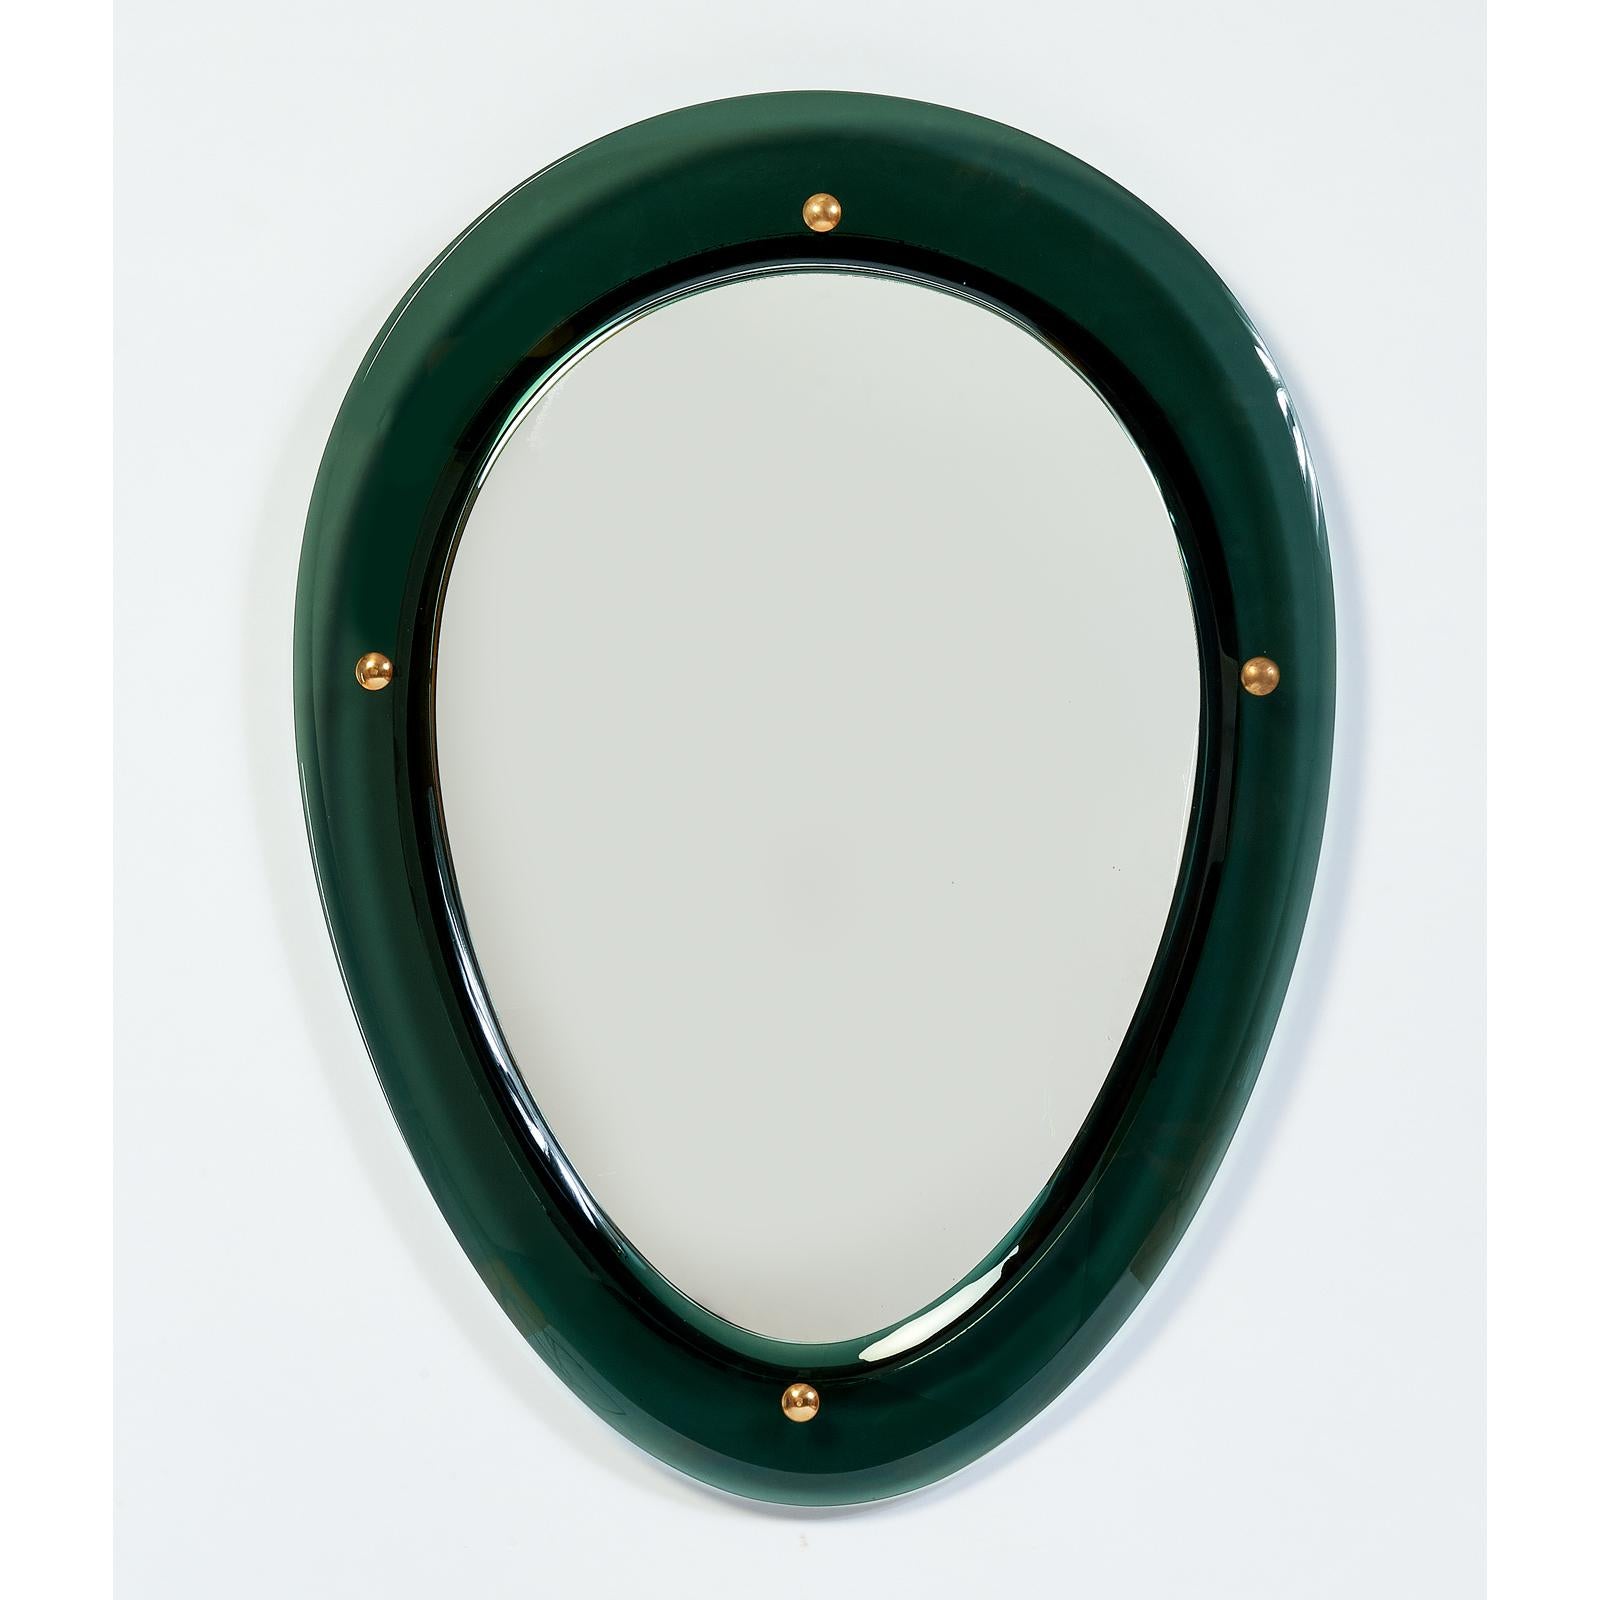 Italy, 1950s
Exquisite pair of oval shaped colored glass mirrors,
with beveled glass frames mounted on mirrored glass, 
with four brass mounts.
Dimensions: 25 W x 33 H x 1 D
On one of the two mirrors corrosion of silvering, see last image.
SOLD AND